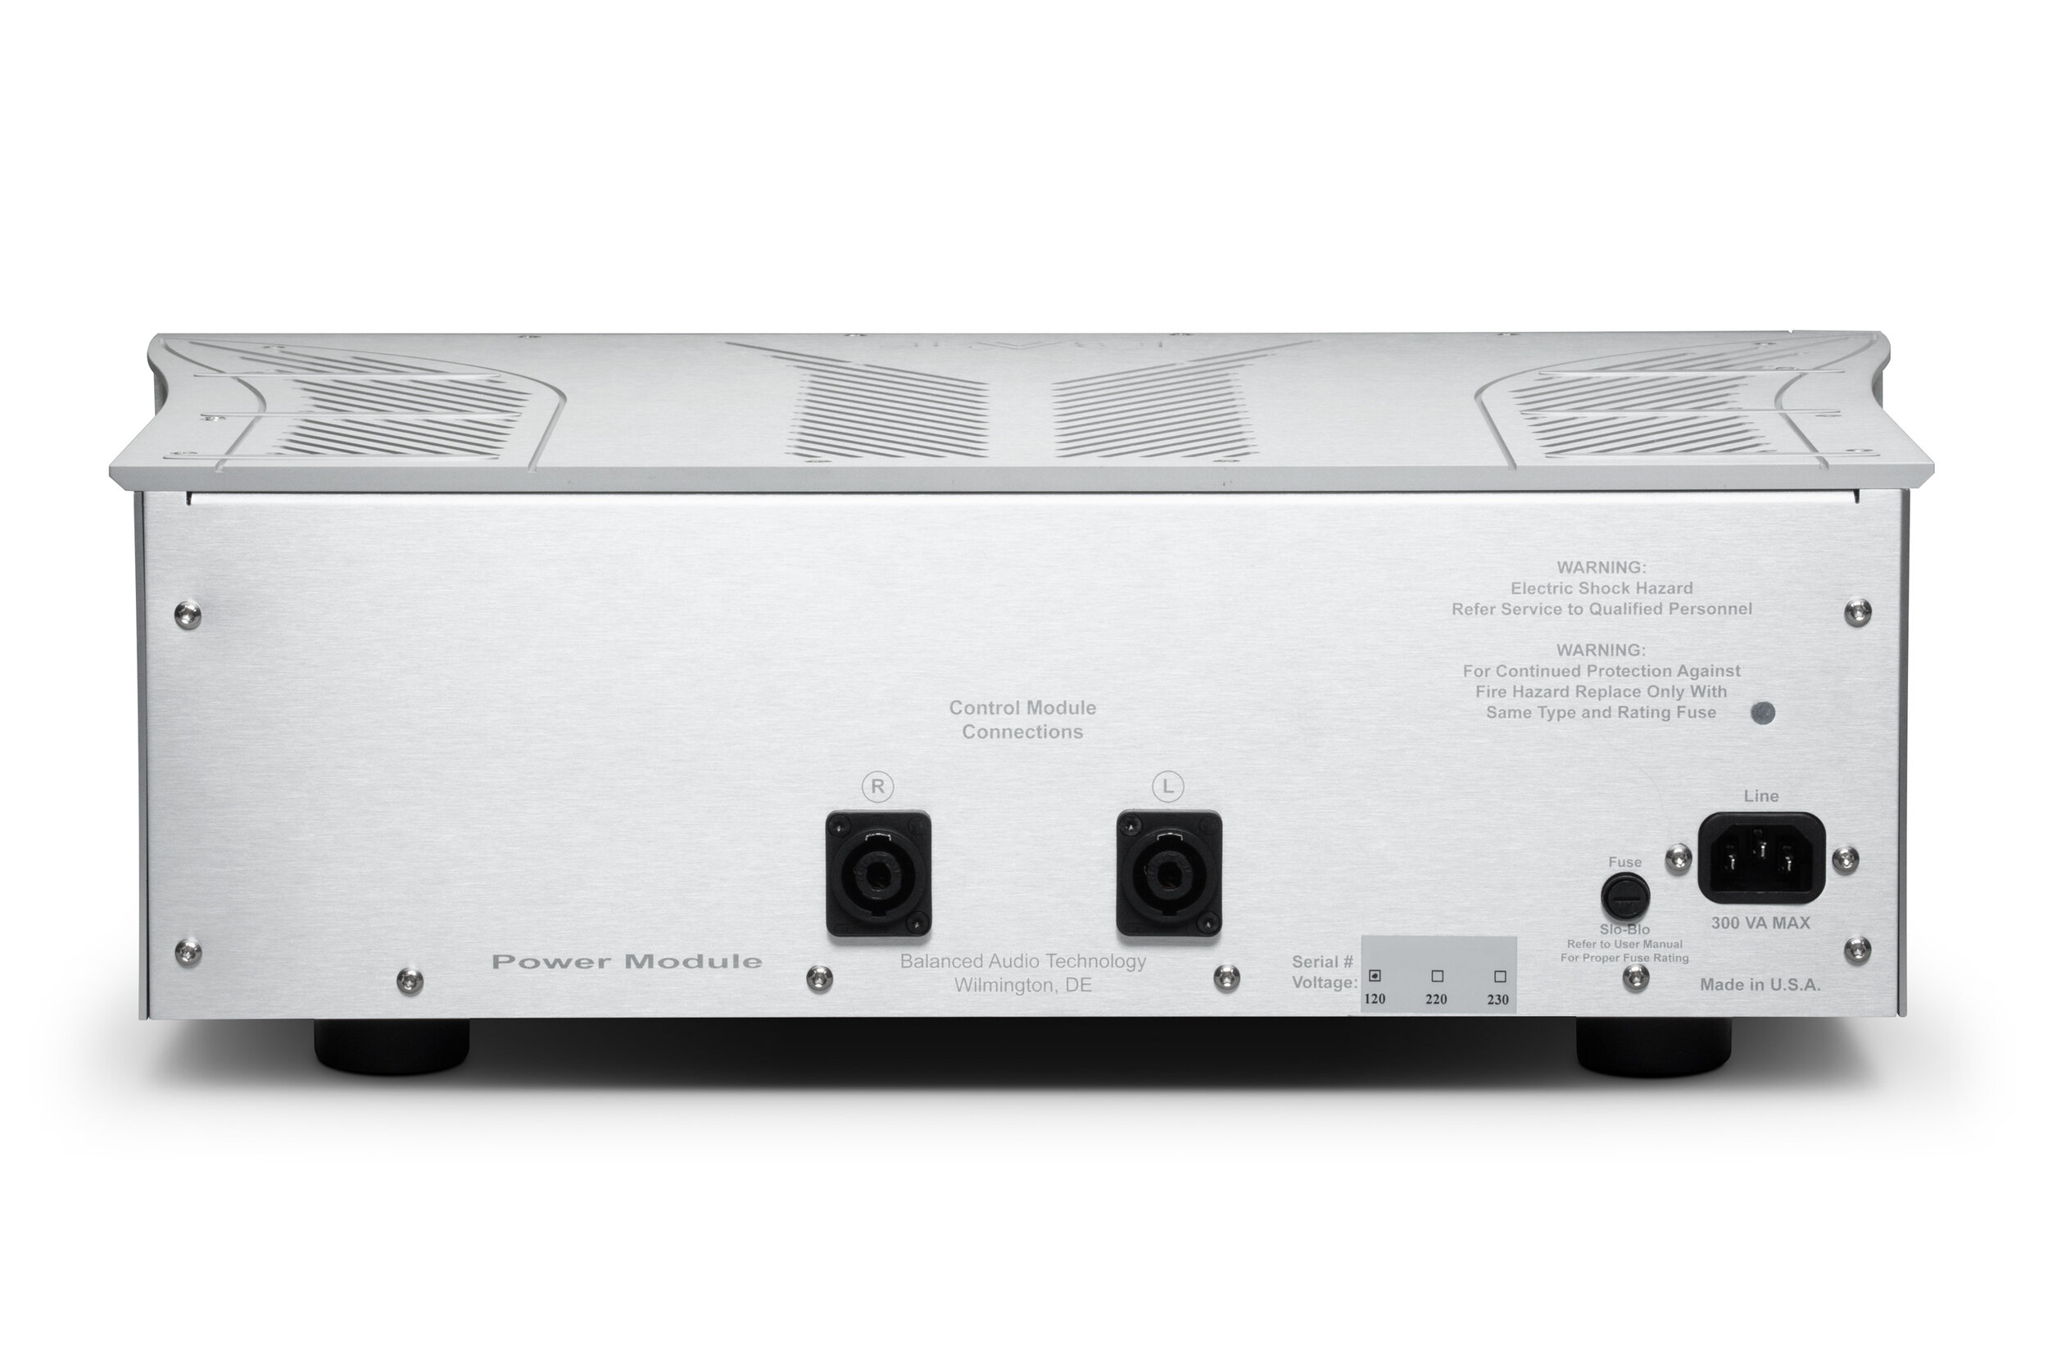 Balanced Audio Technology Rex 3 Preamplifier (PRICE RED... 8